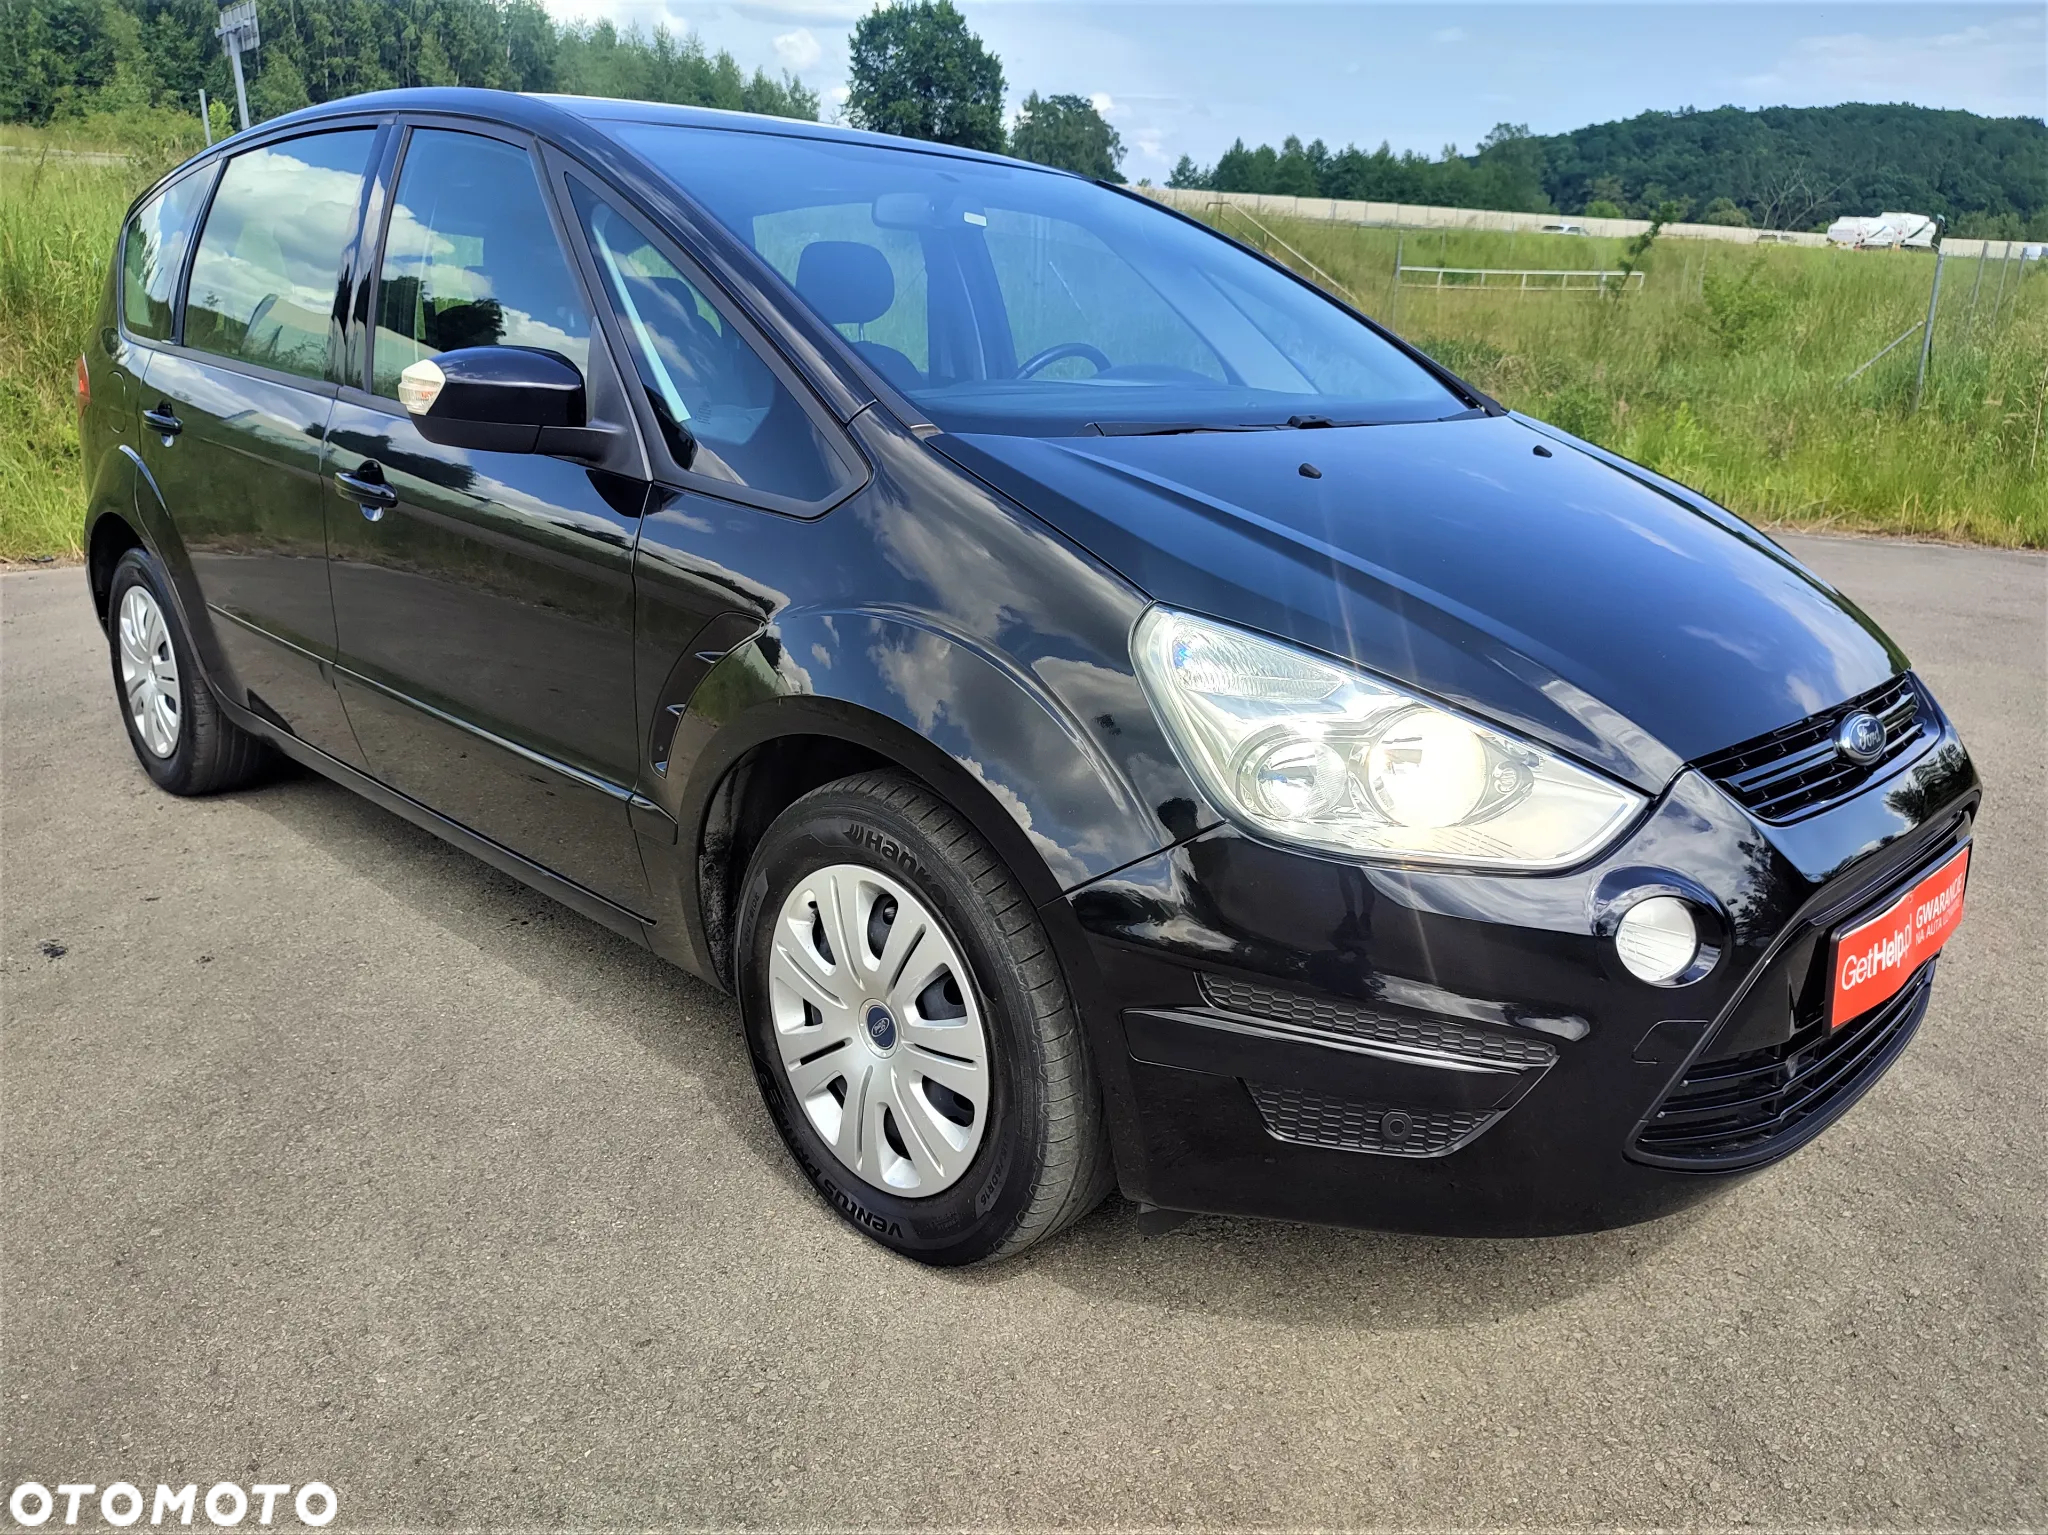 Ford S-Max 2.0 TDCi DPF Business Edition - 18